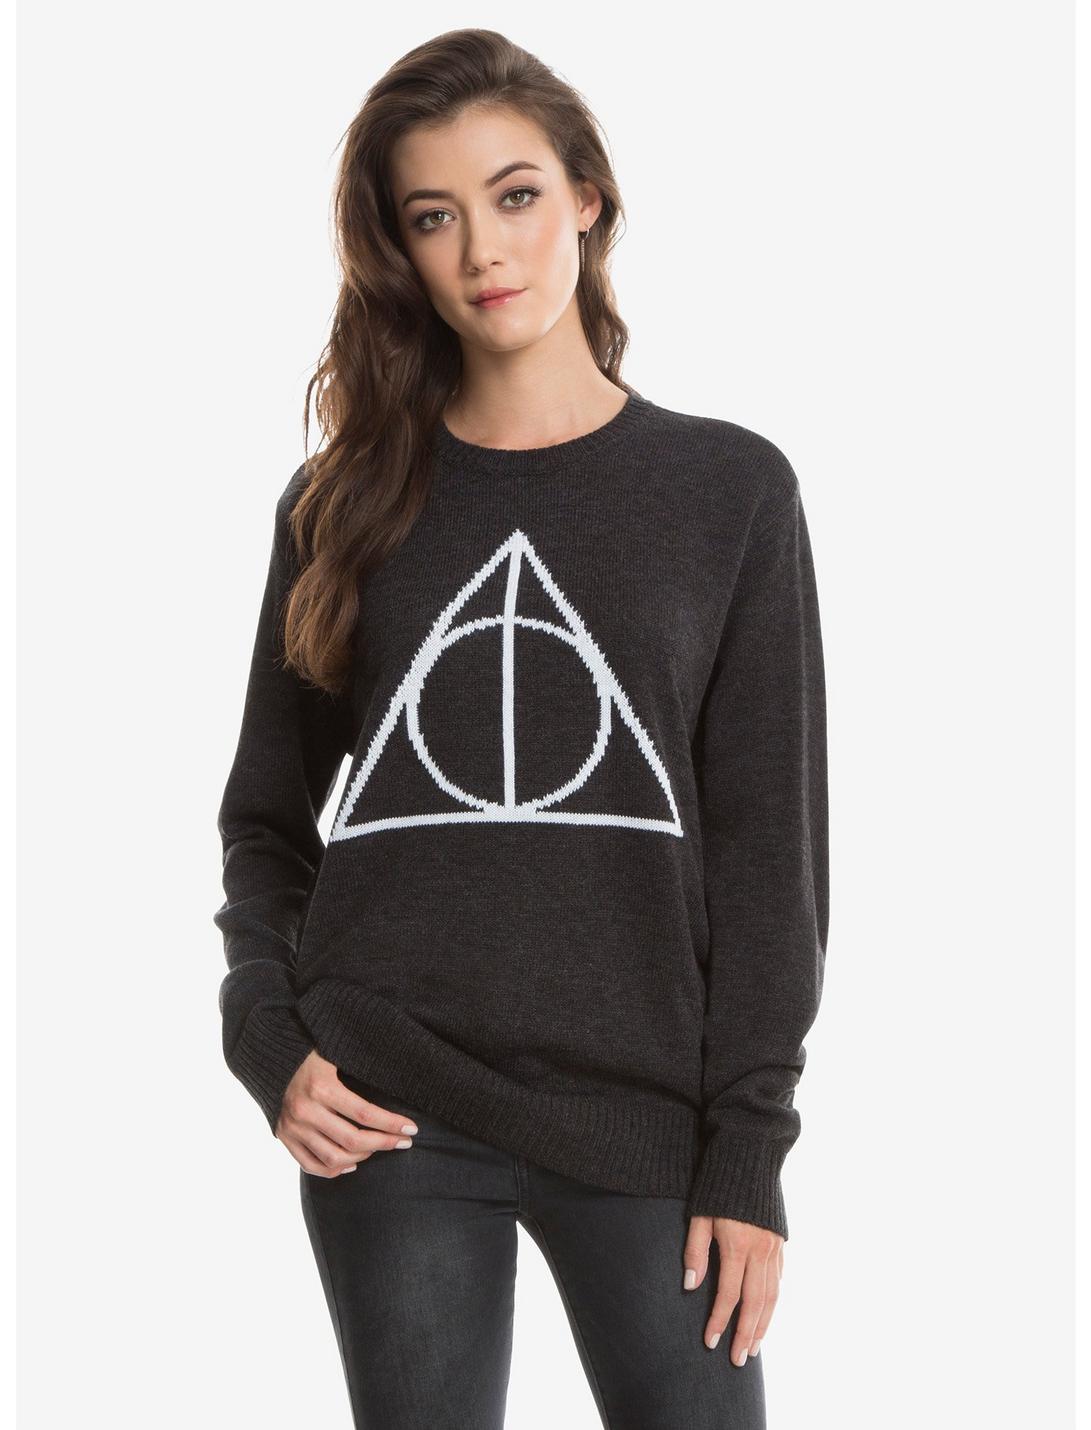 Harry Potter Deathly Hallows Womens Intarsia Pullover Sweater, BLACK-WHITE, hi-res